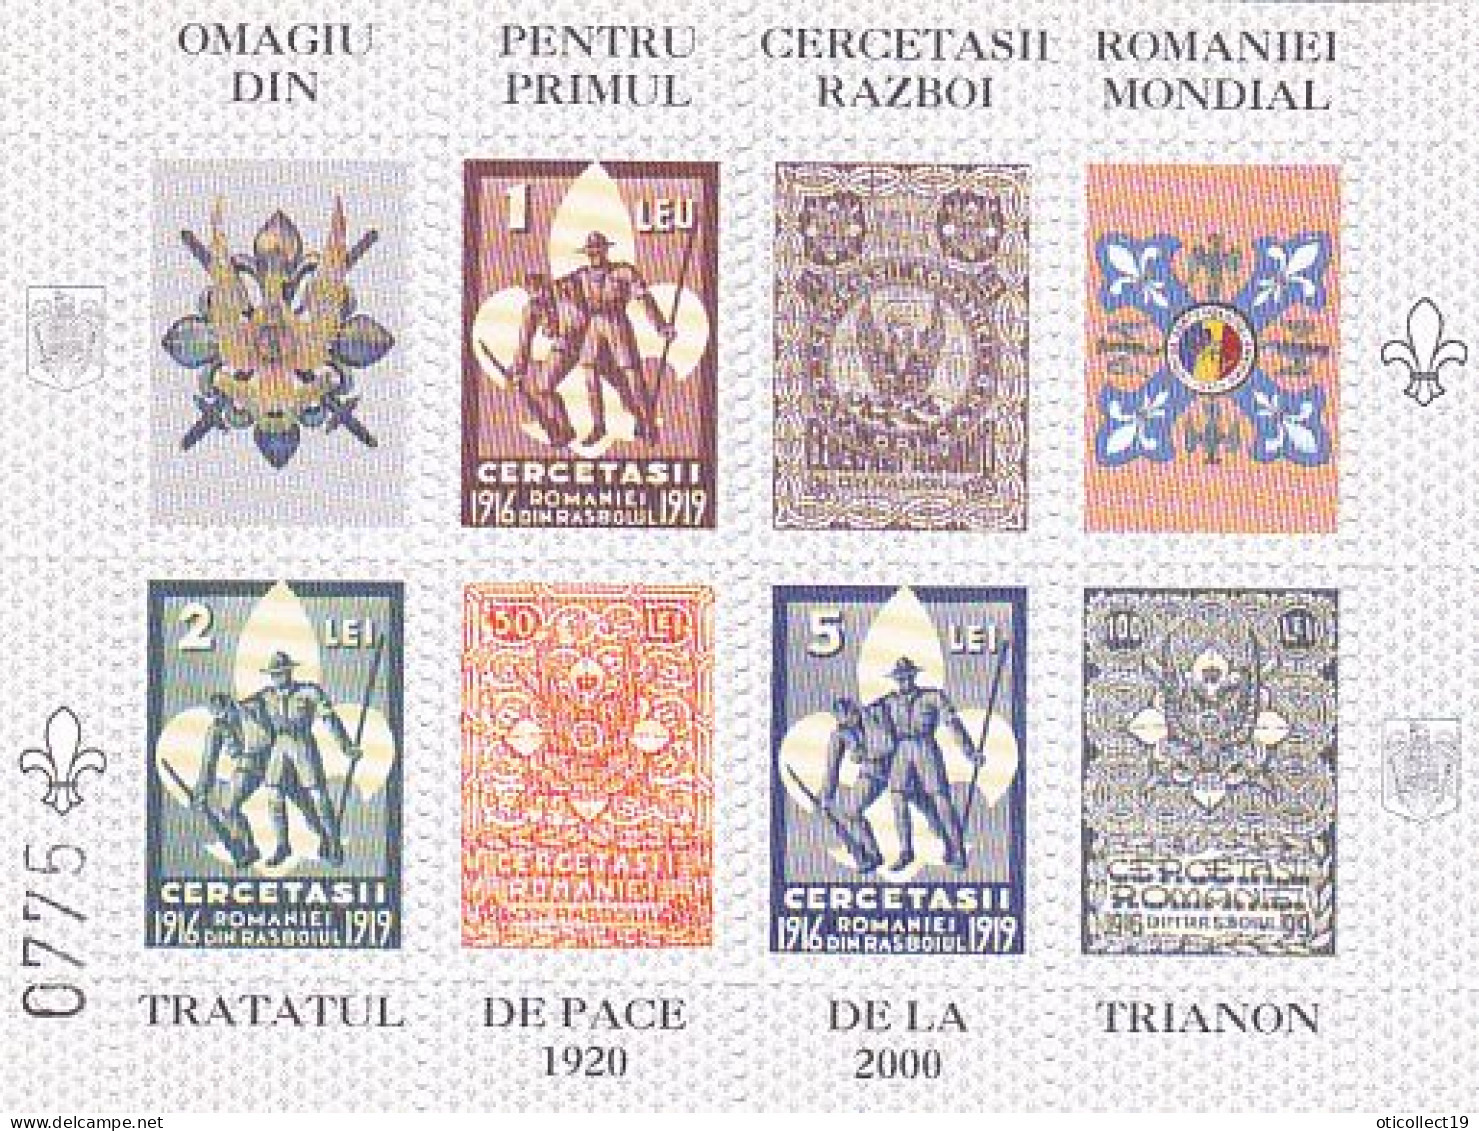 FULL SHEETS, SCOUTS, SCOUTISME, ROMANIAN SCOUTS IN WW1 MEMORIAL SHEET, 2000, ROMANIA - Hojas Completas